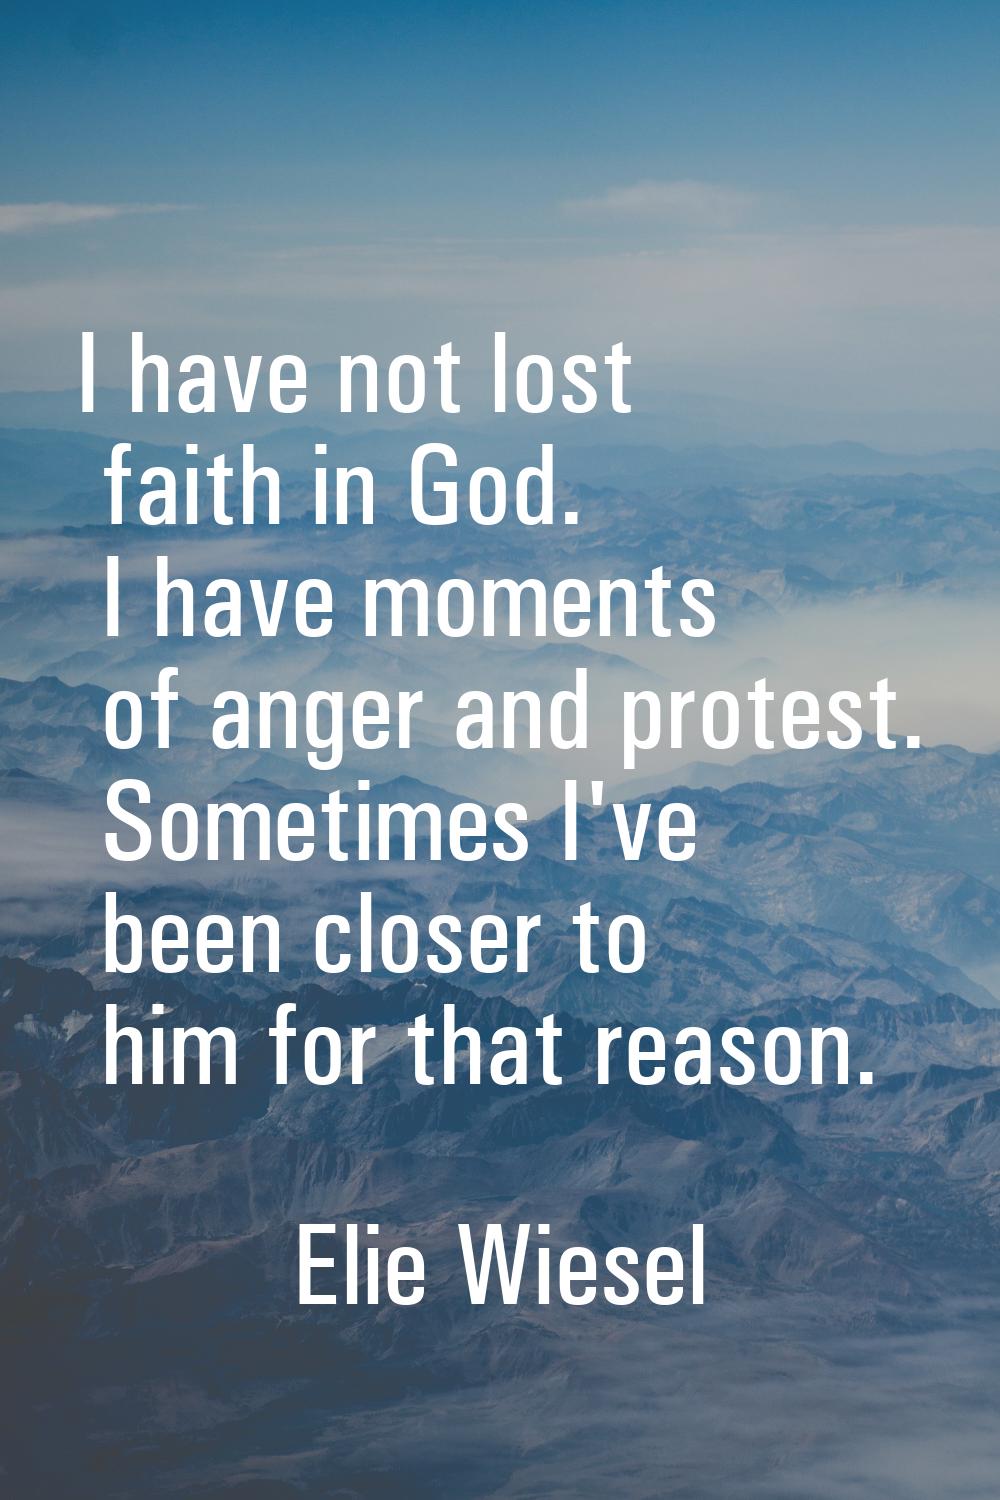 I have not lost faith in God. I have moments of anger and protest. Sometimes I've been closer to hi